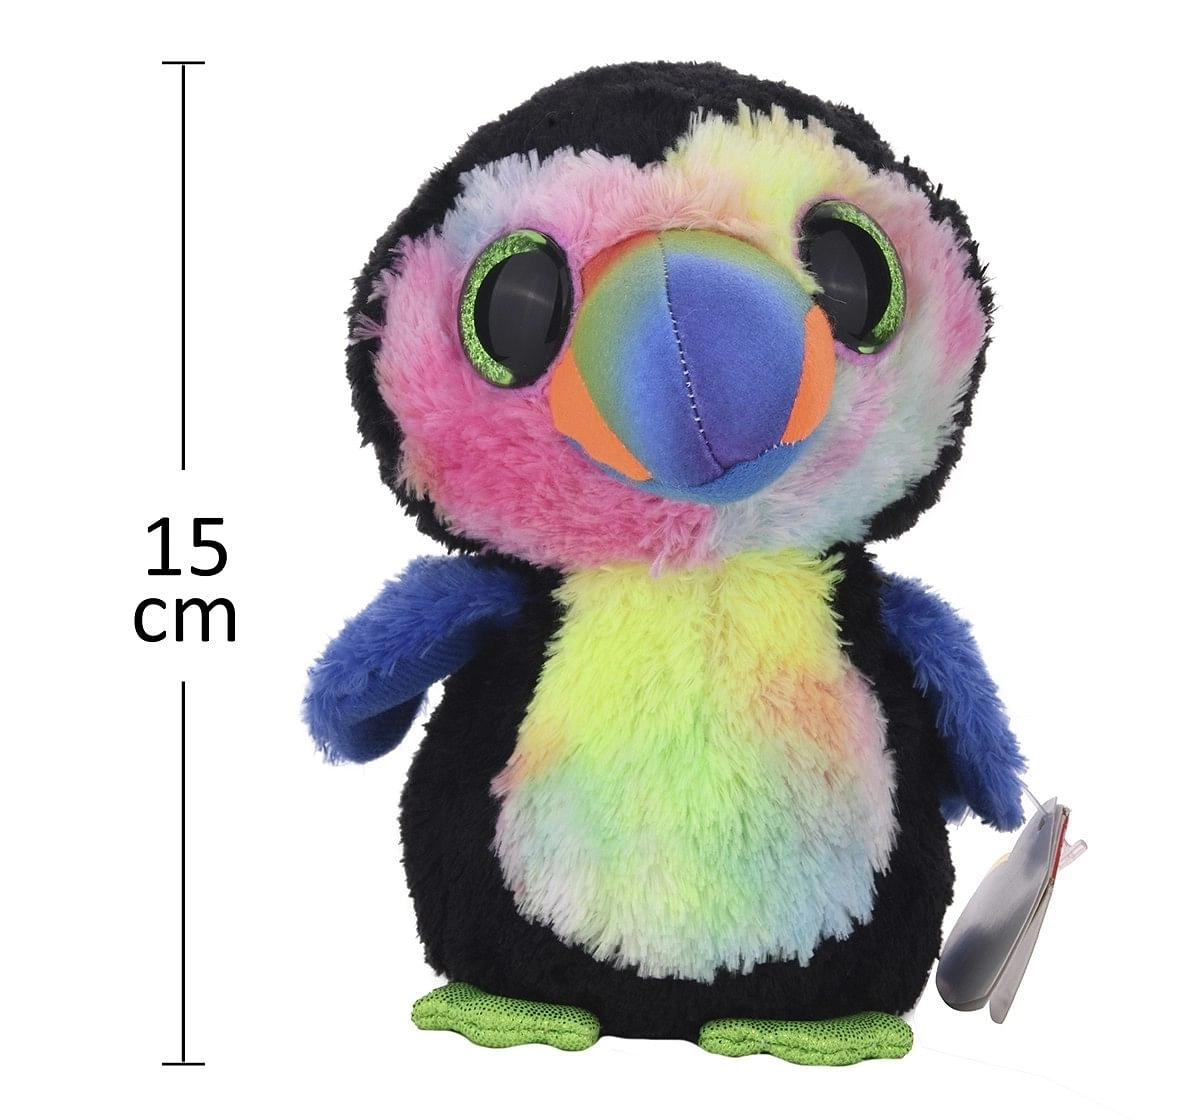  Ty Beanie boos Beaks - toucan bird reg Quirky Soft Toys for Kids age 3Y+ - 15 Cm 